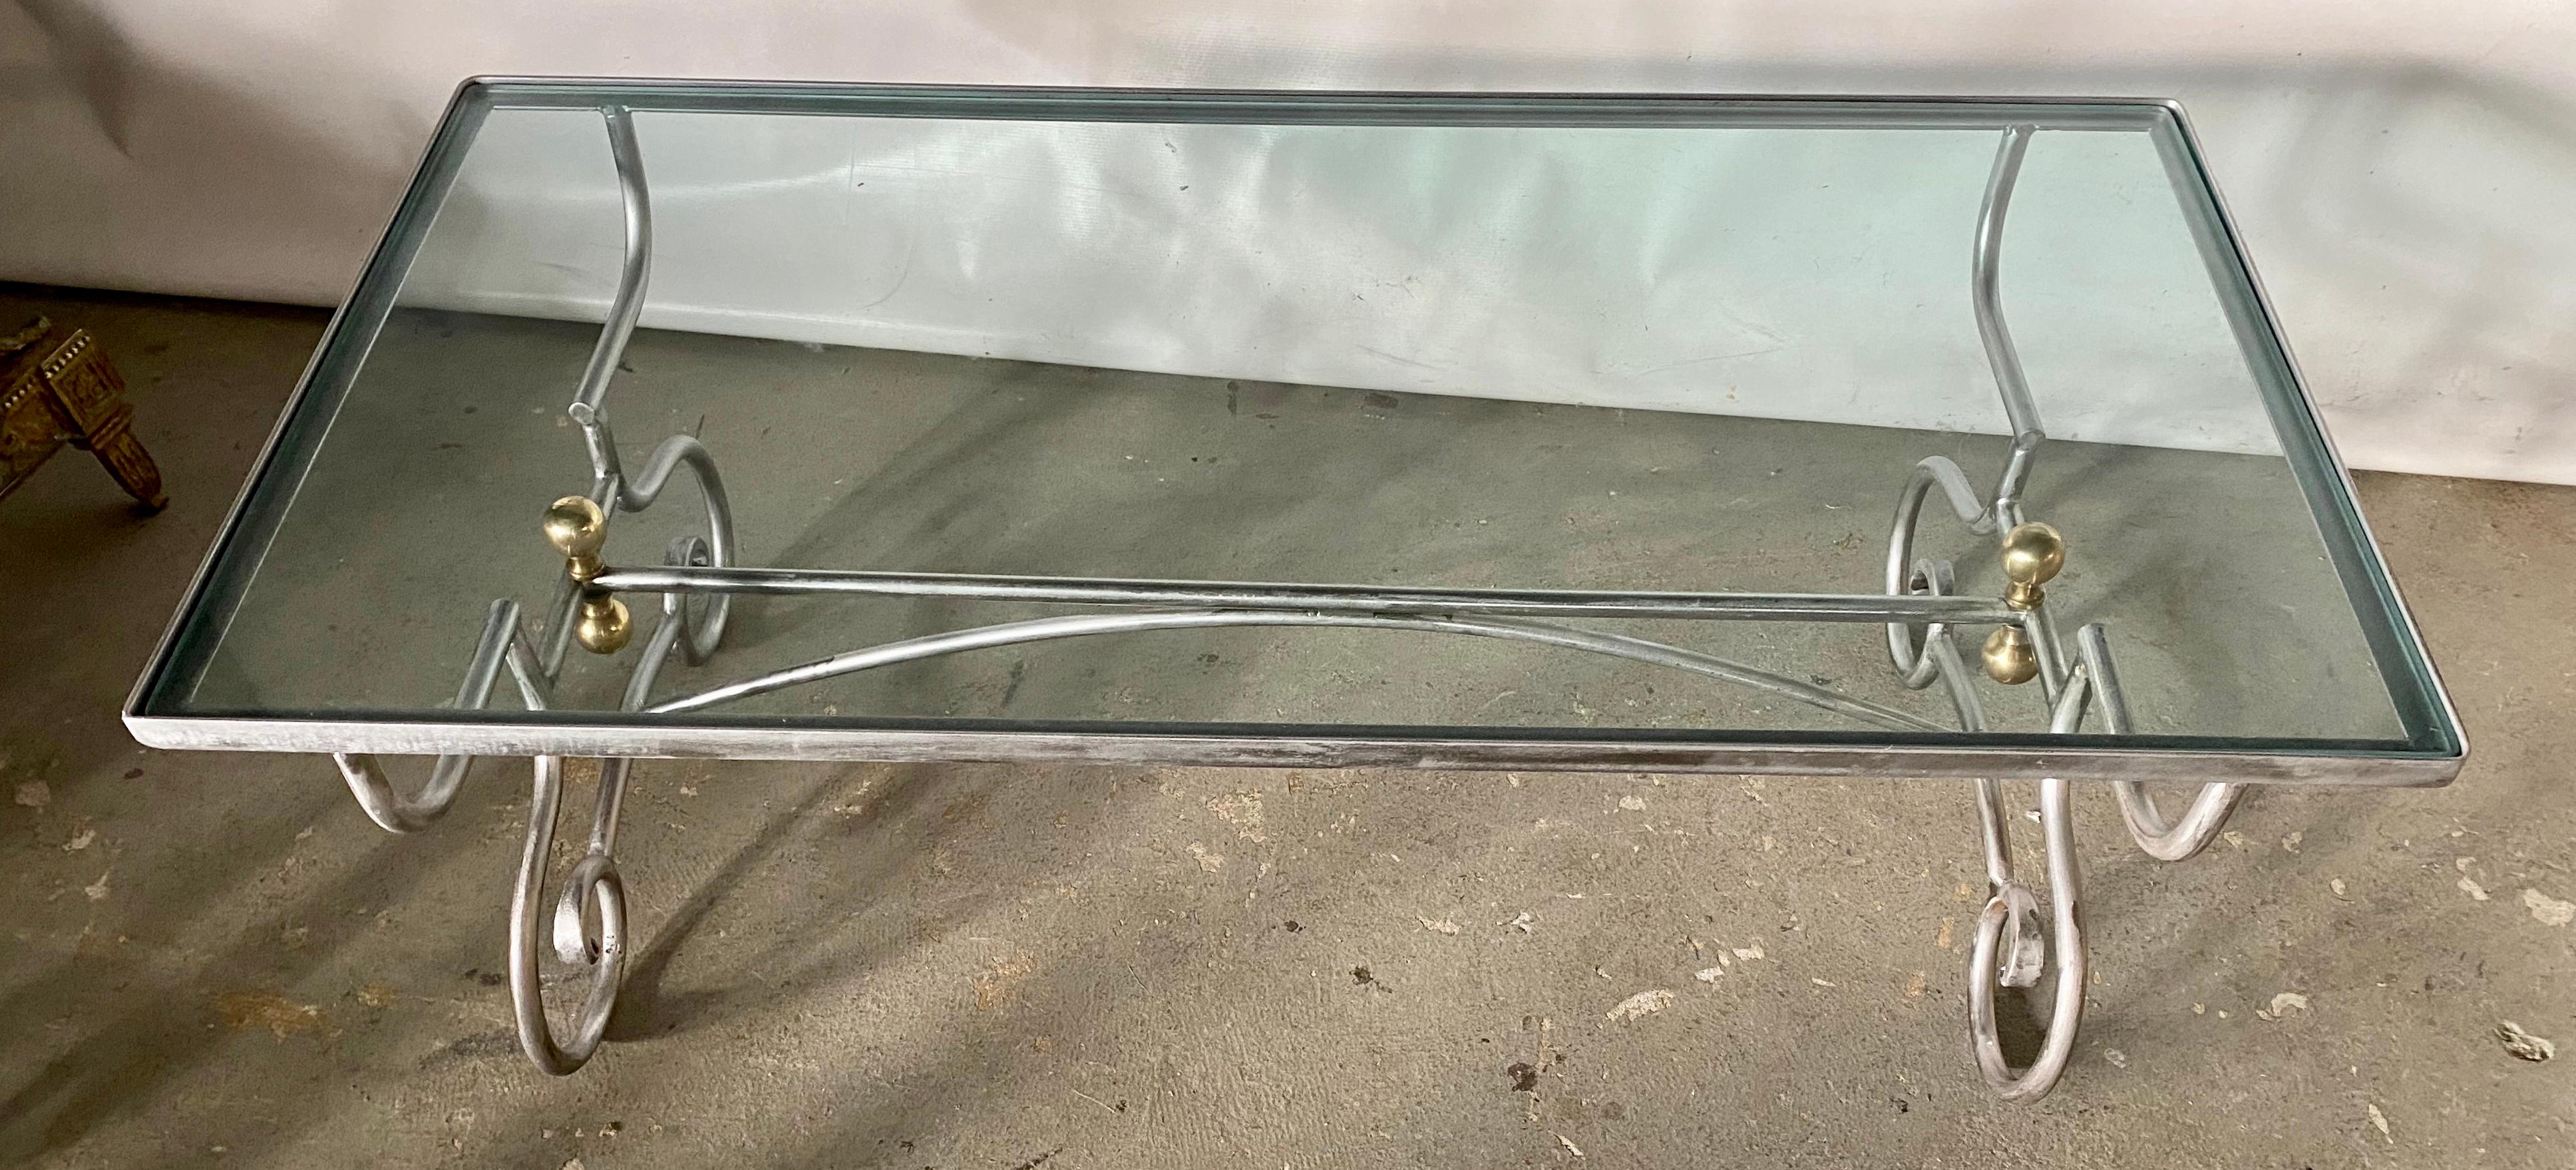 The contemporary Maison Jansen inspired wrought iron steel coffee table has a glass top inset in a frame. The two gracefully curved legs, embellished by pairs of brass knobs, are secured by two cross bars, one straight and one arched. The table